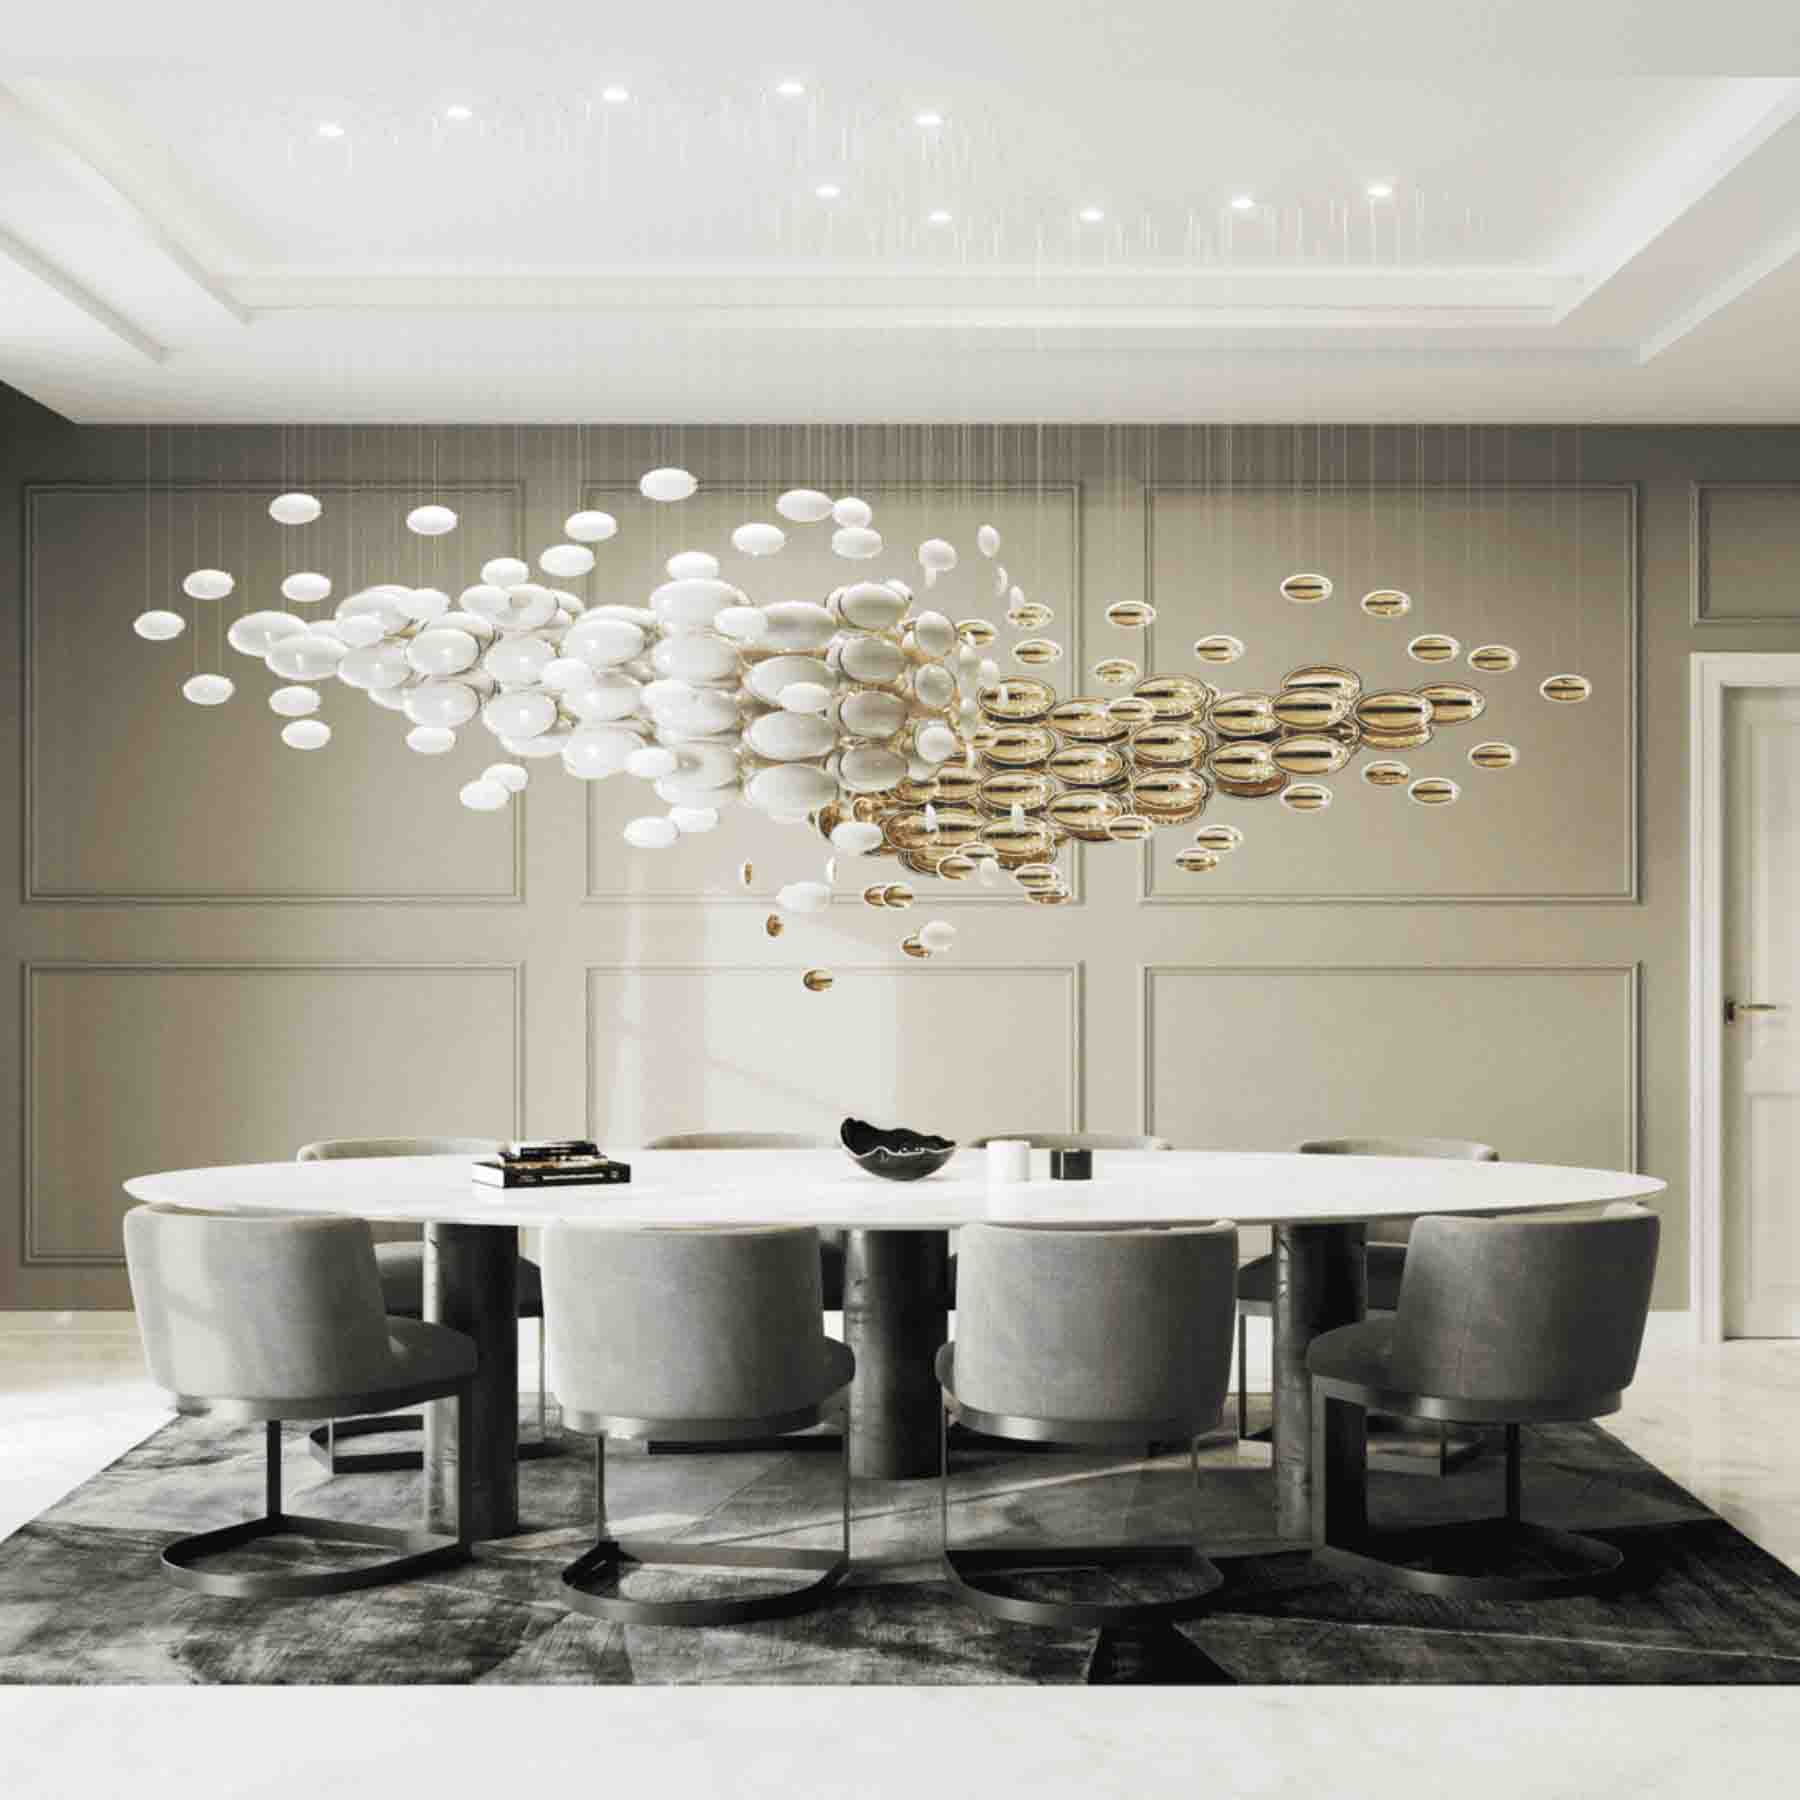 customize every aspect of the light fixture to suit the desired ambiance